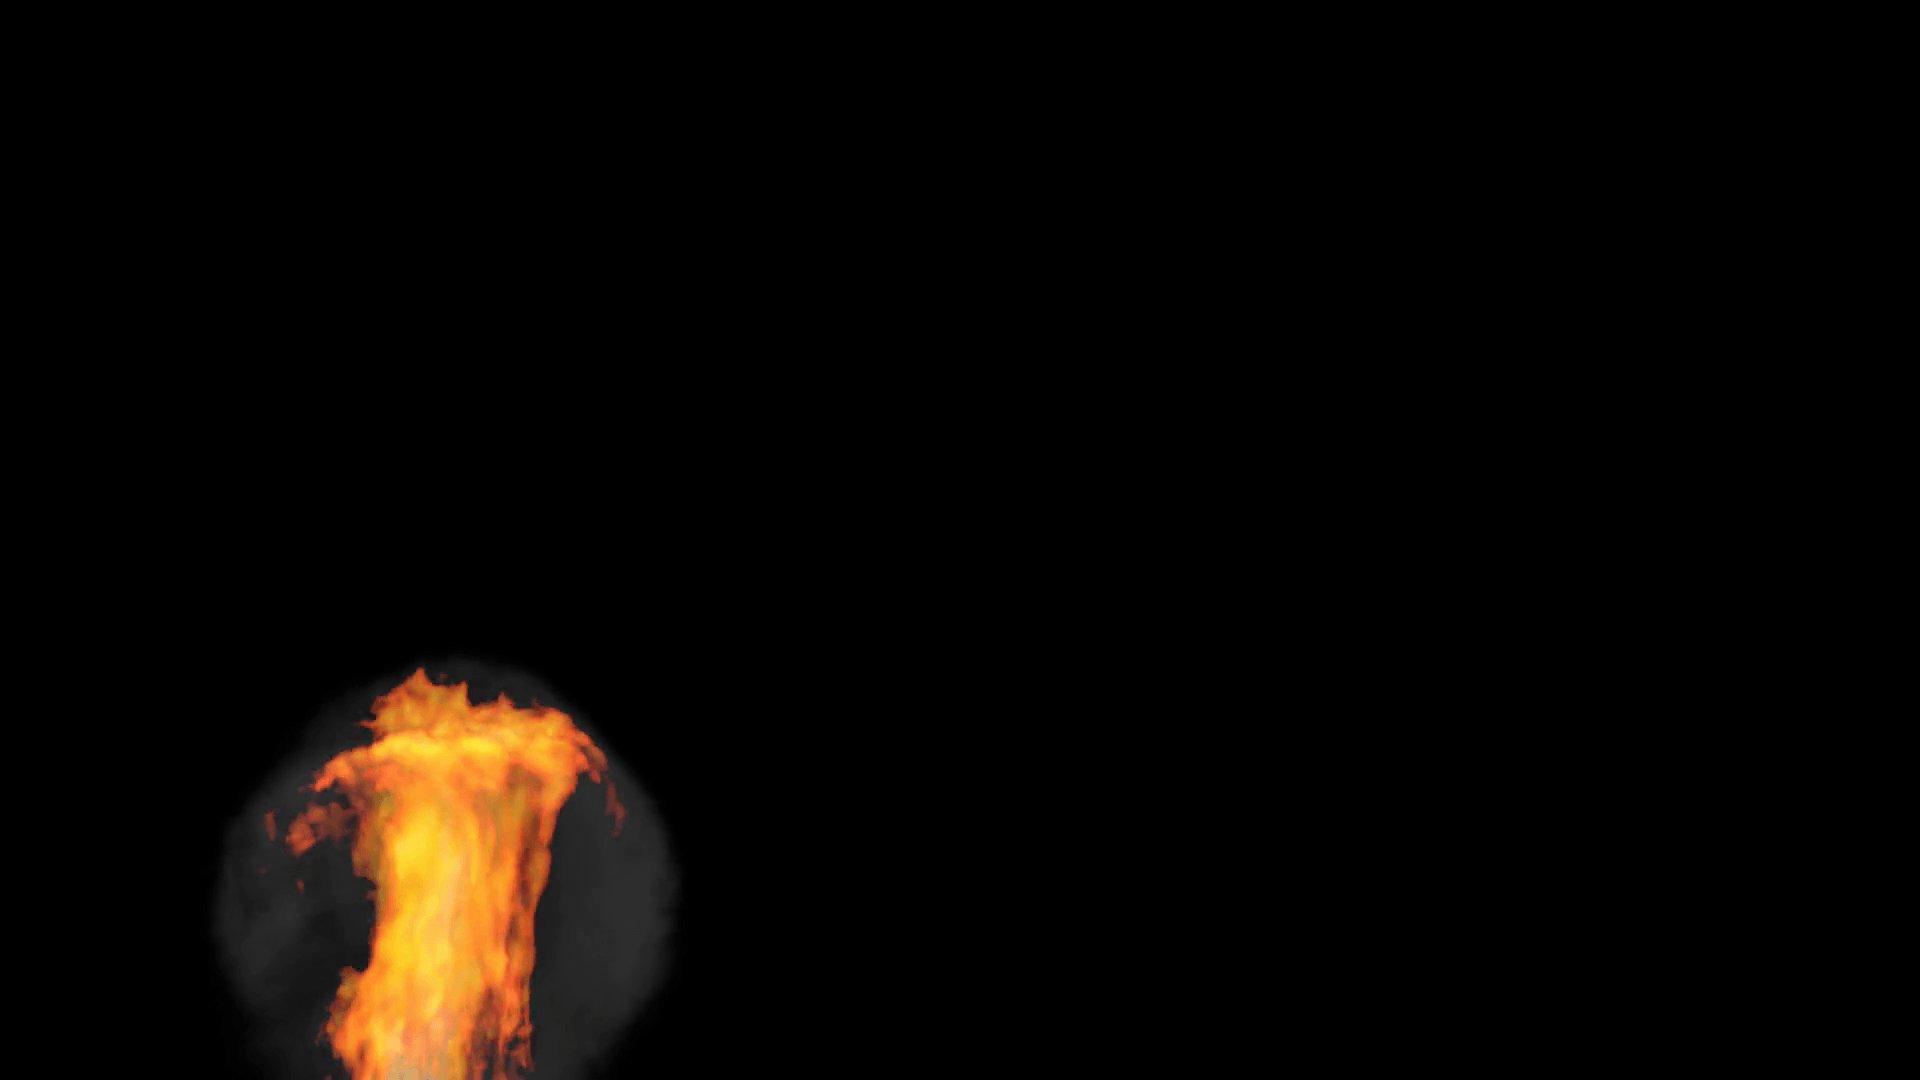 Animated locomotive's fire and smoke against transparent background